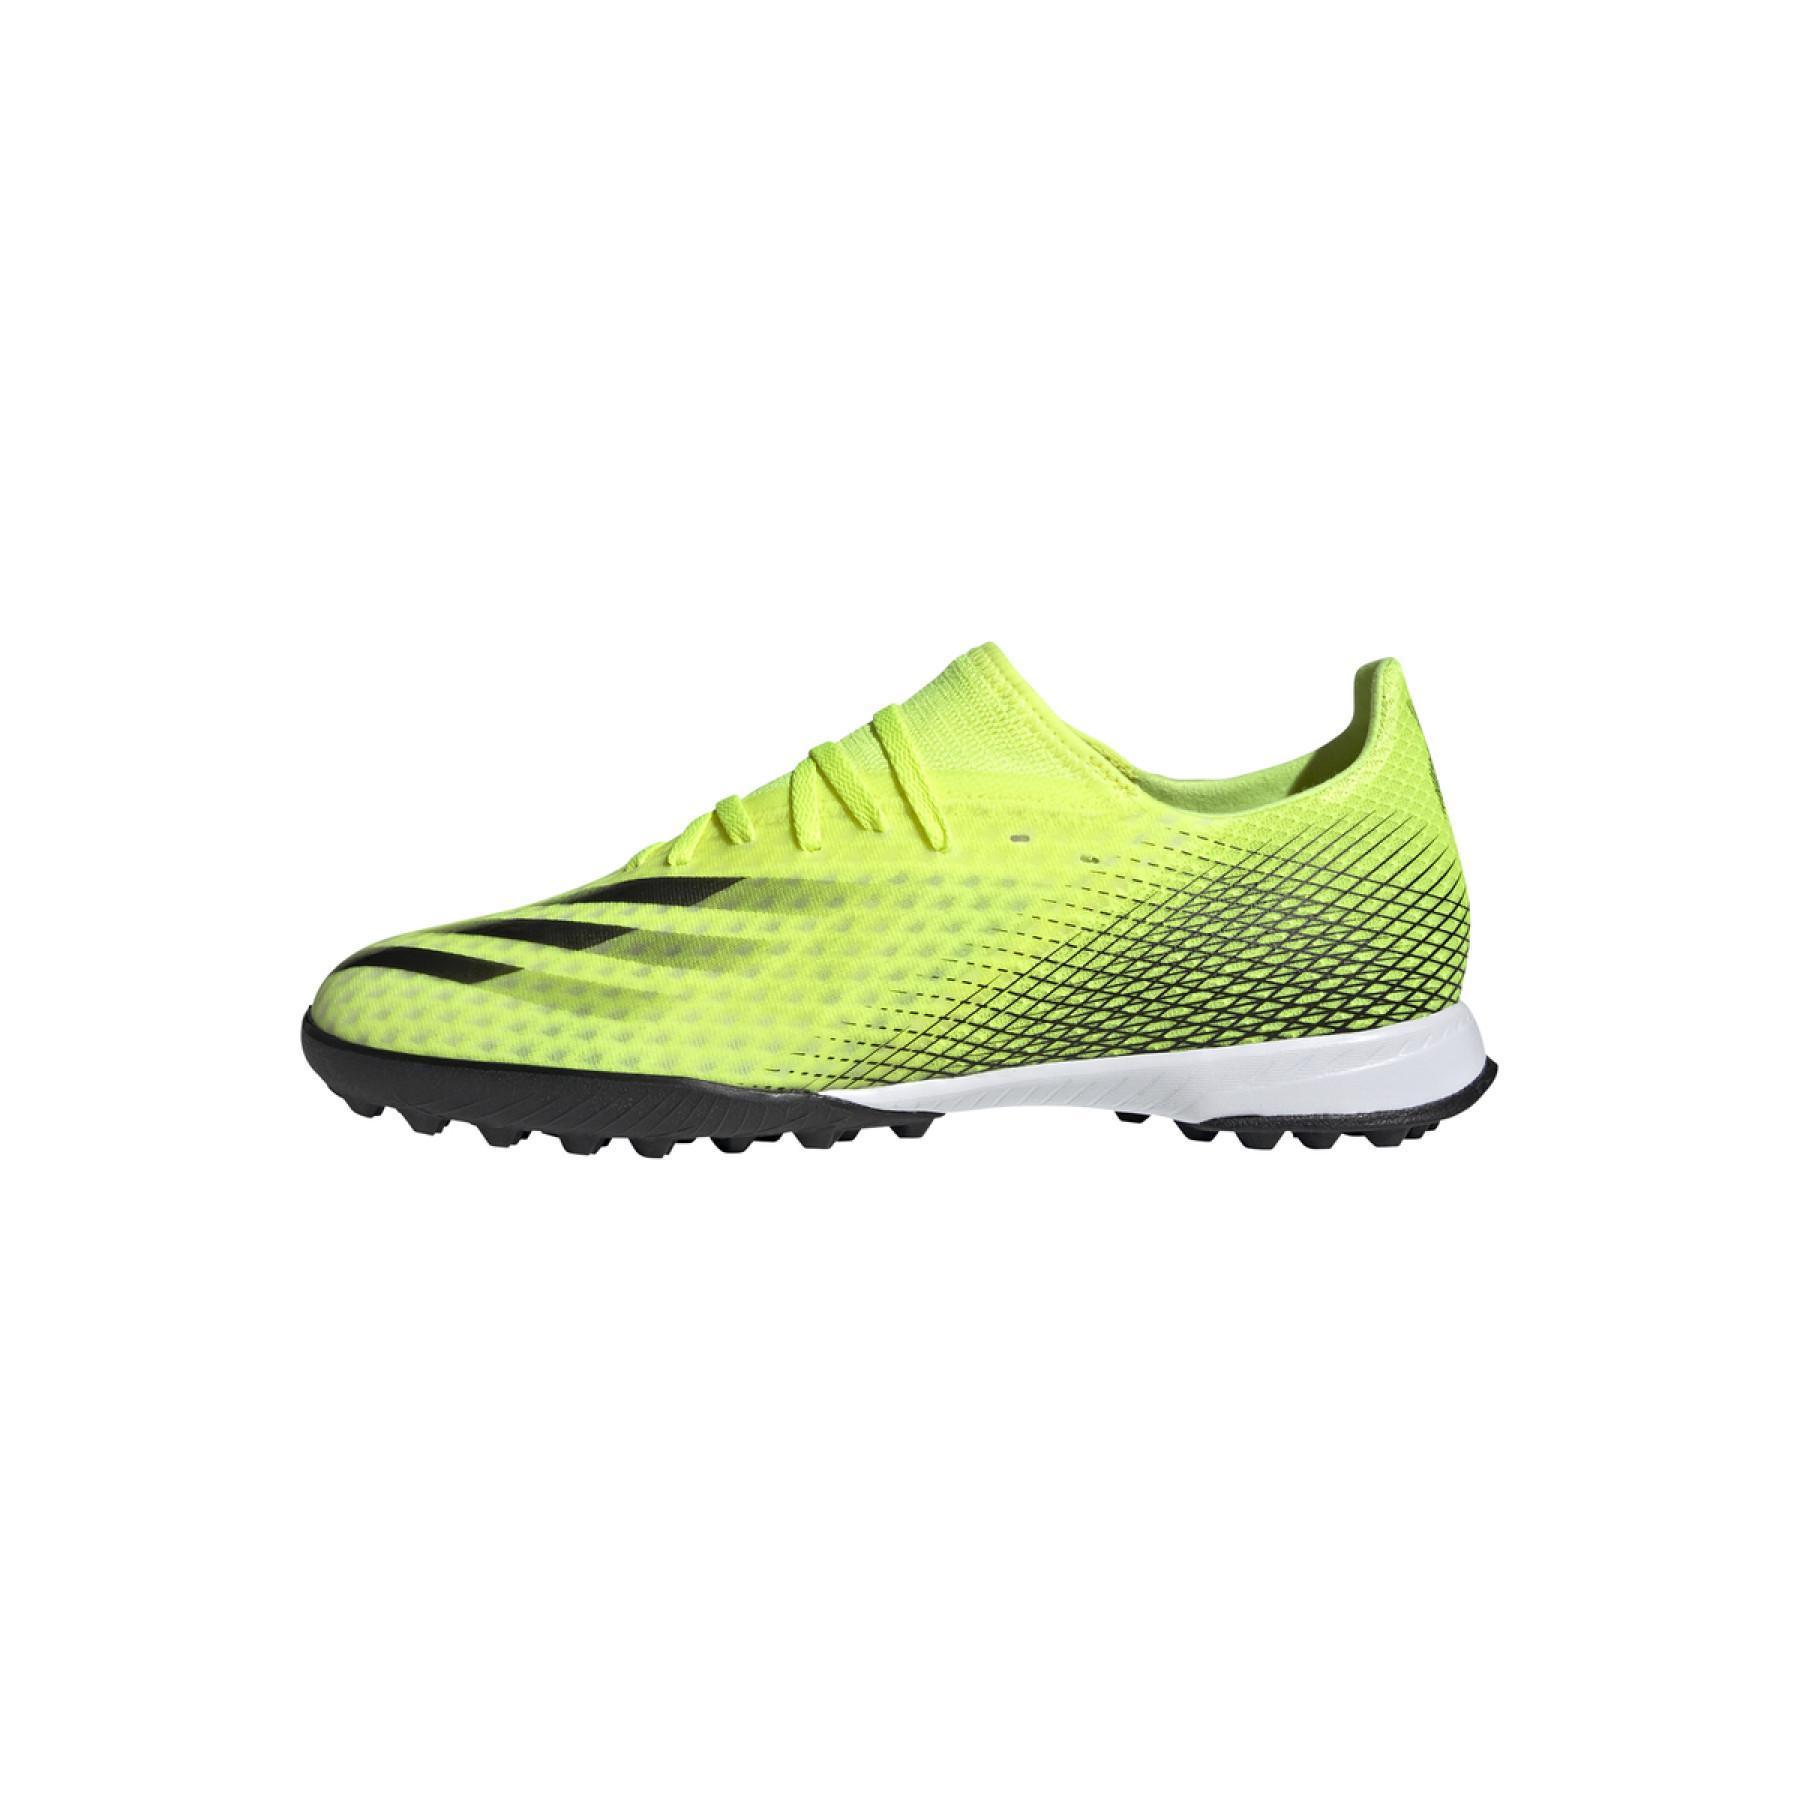 Under Armour Homme TF SPEED FORM Astro-Turf Football Confort Baskets 003 